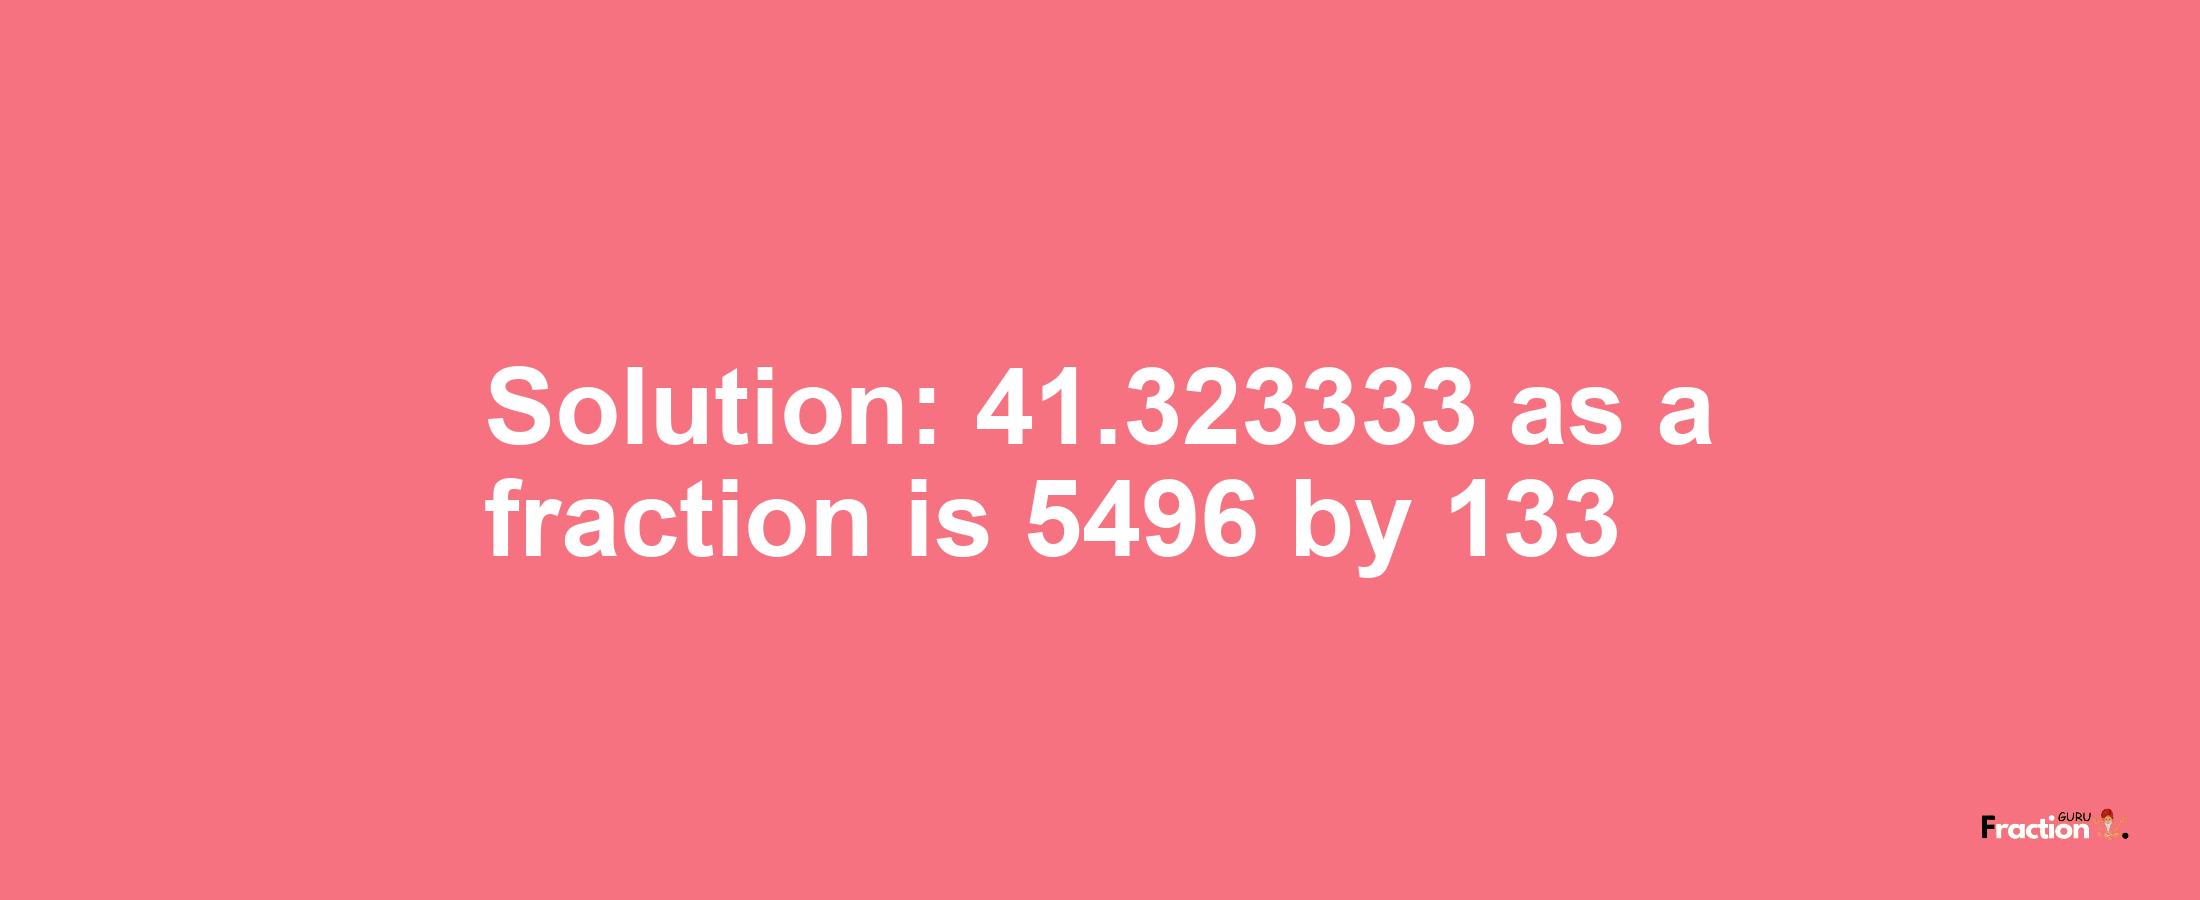 Solution:41.323333 as a fraction is 5496/133